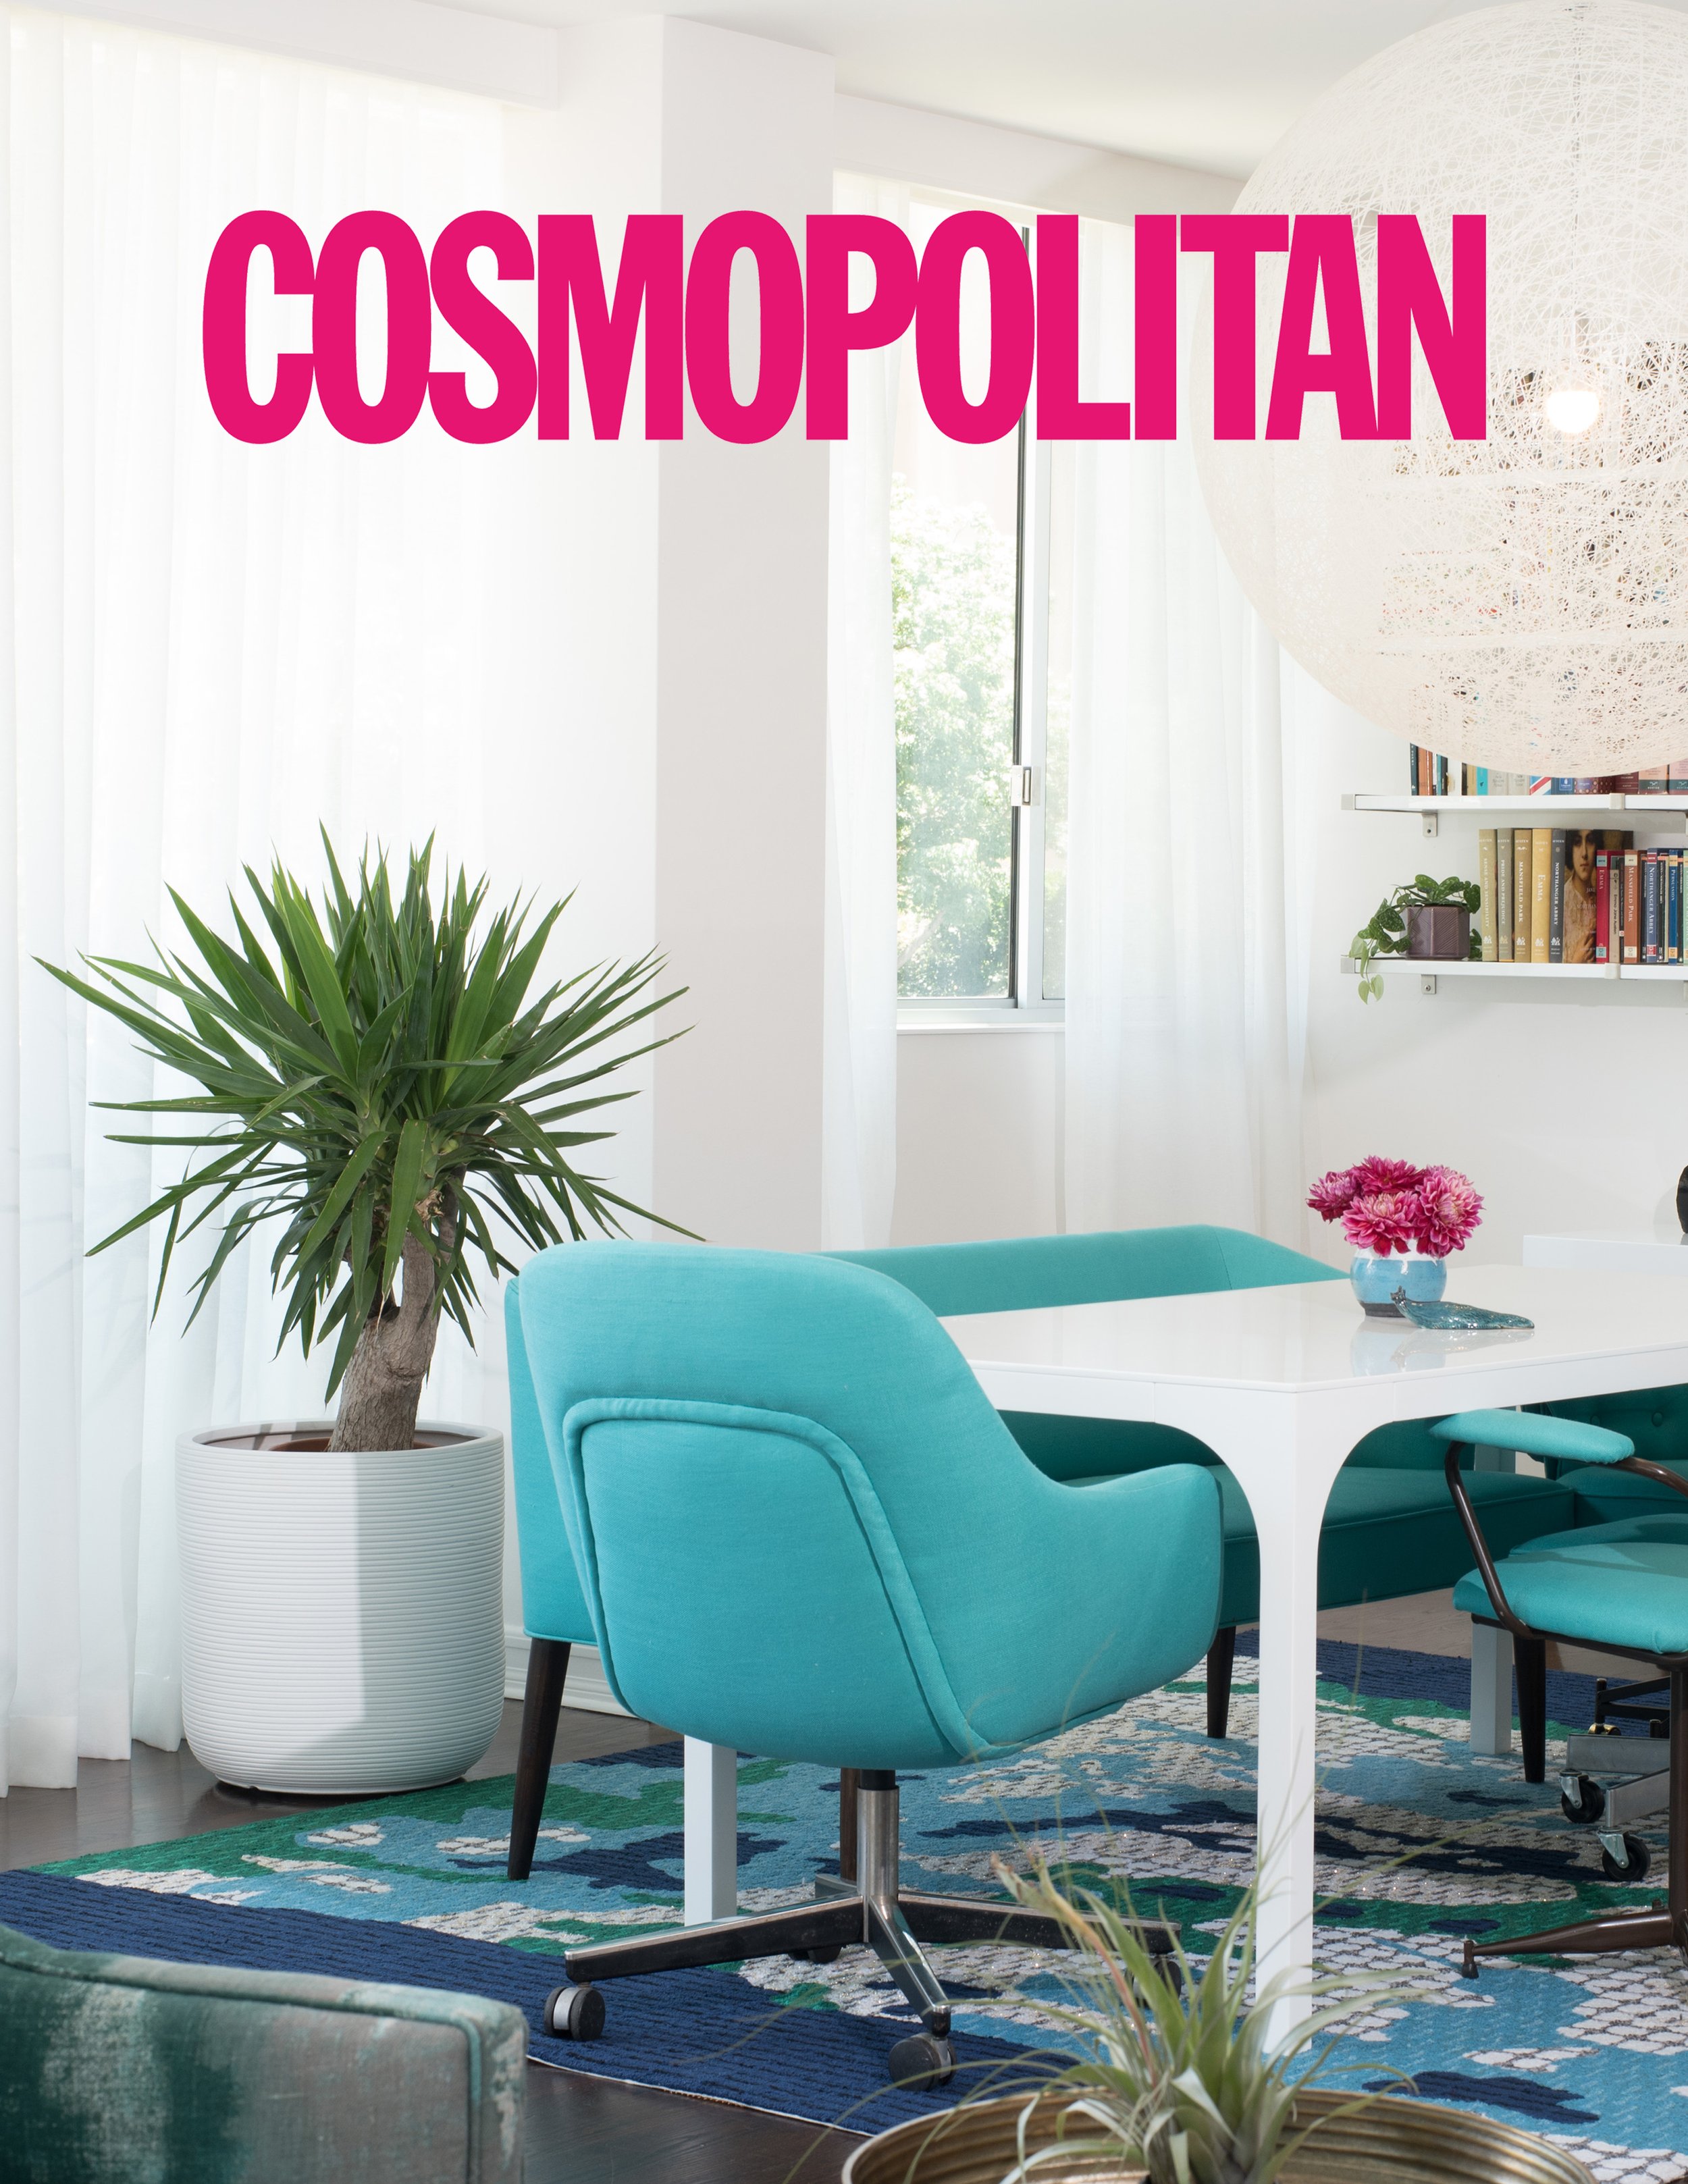  Cosmopolitan article featuring quotes from Sarah Barnard on indoor palm plants.  